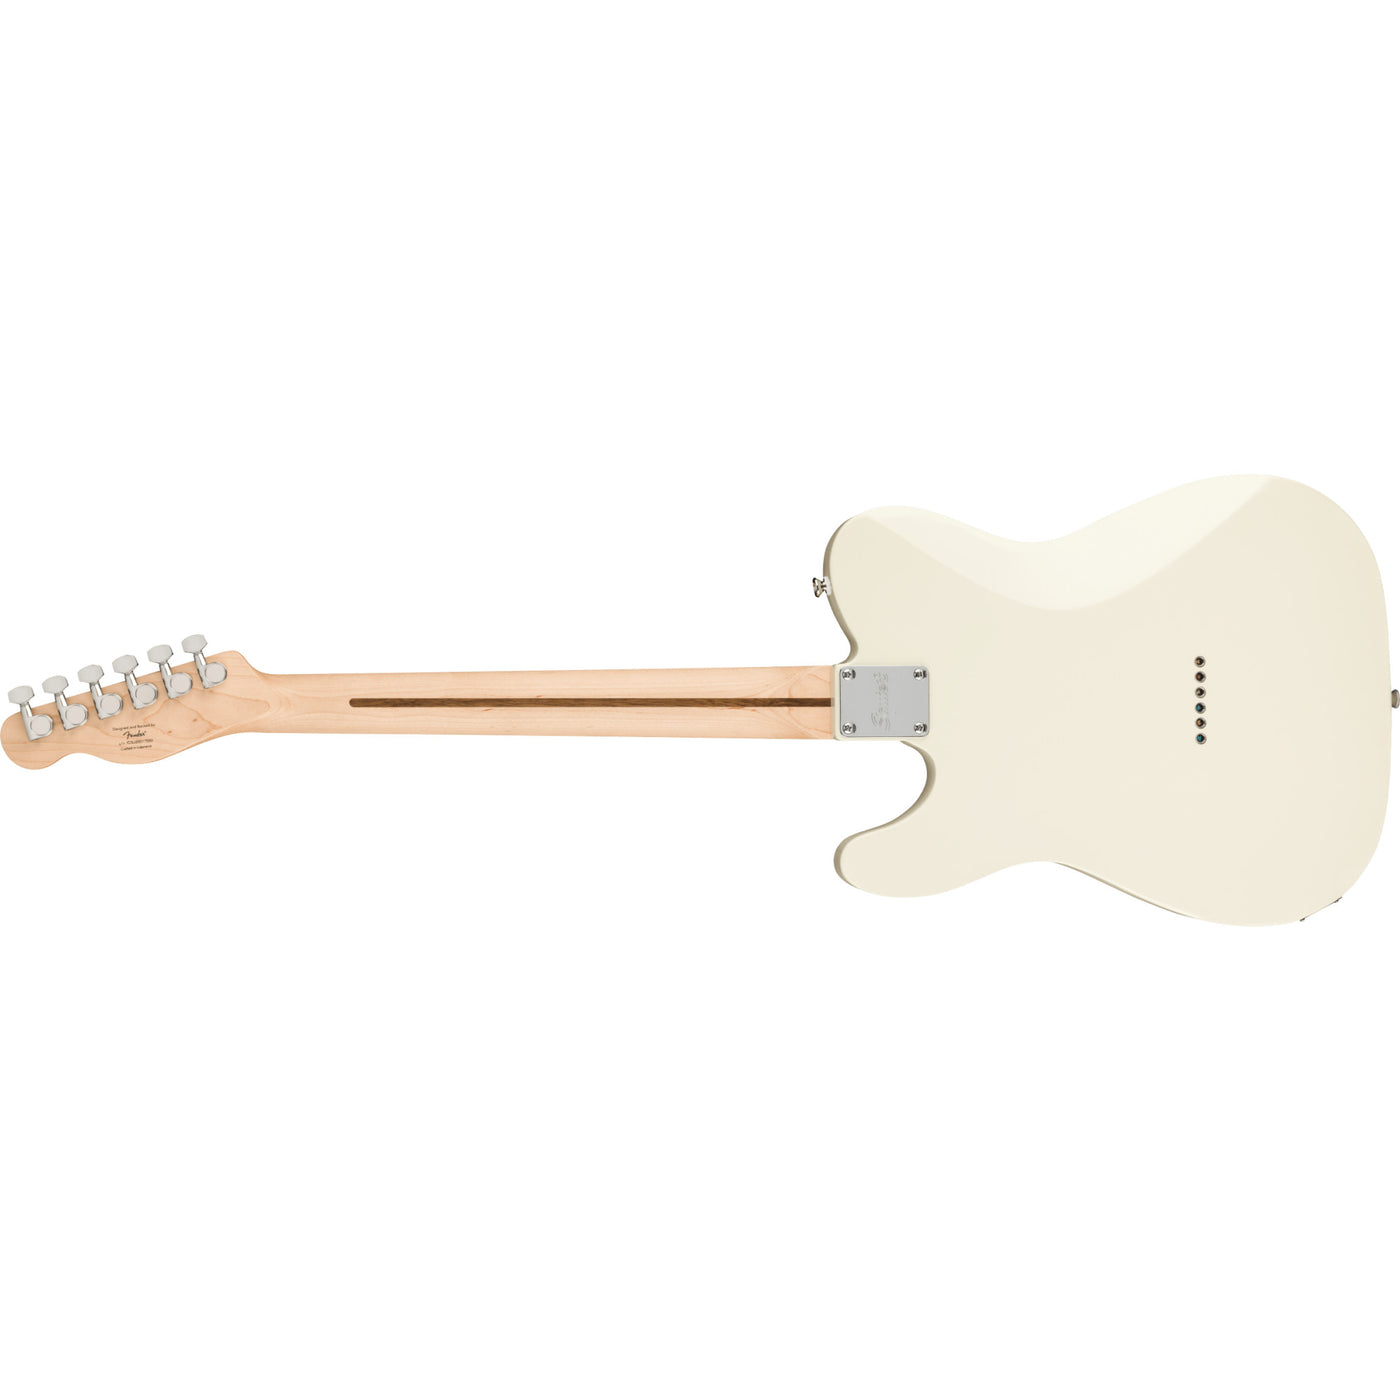 Fender Affinity Series Telecaster Electric Guitar, Olympic White (0378200505)